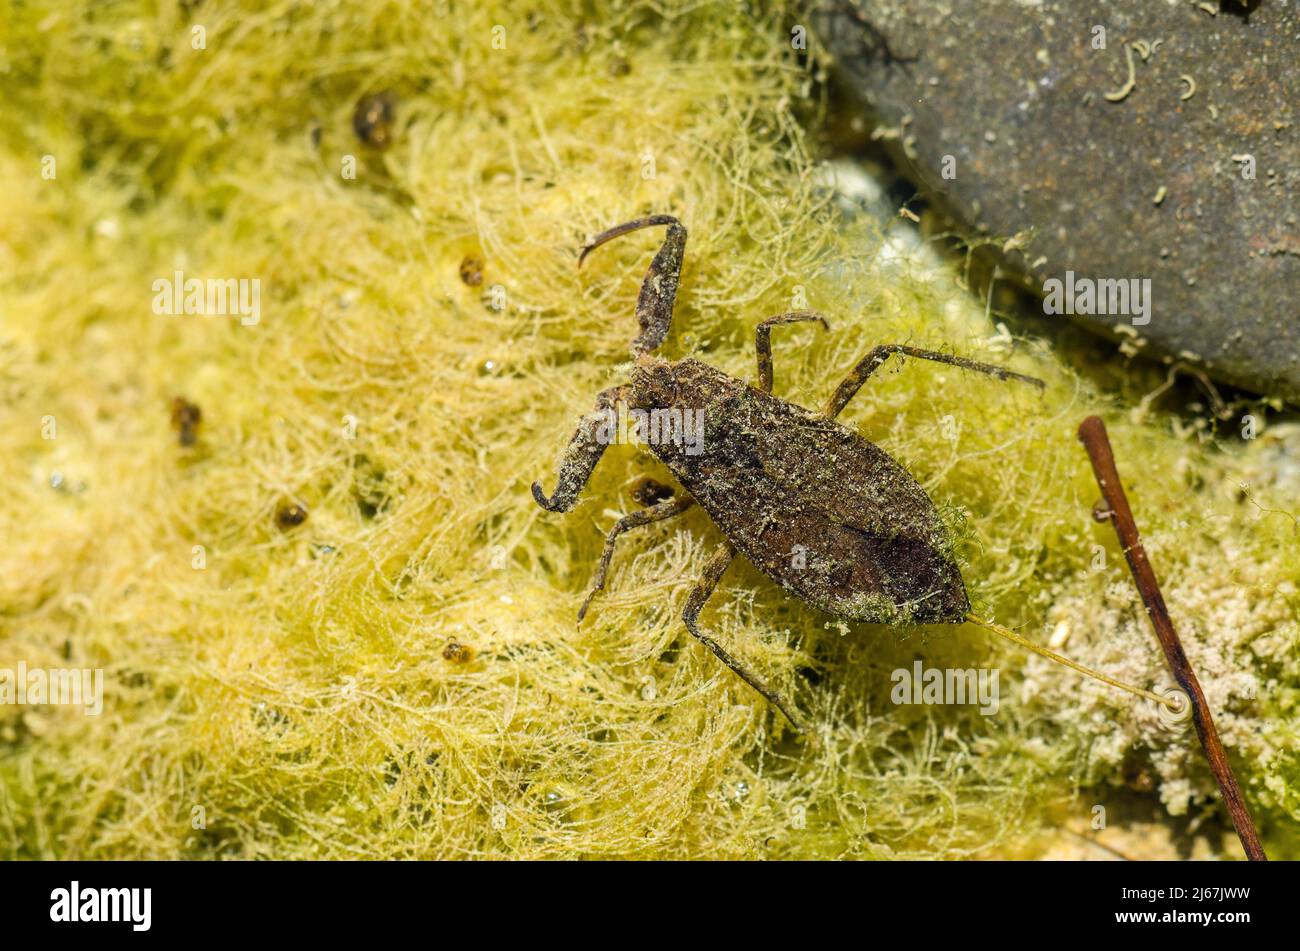 Nepa cinerea is a species of water scorpion (Nepidae), found in most of Europe. Stock Photo